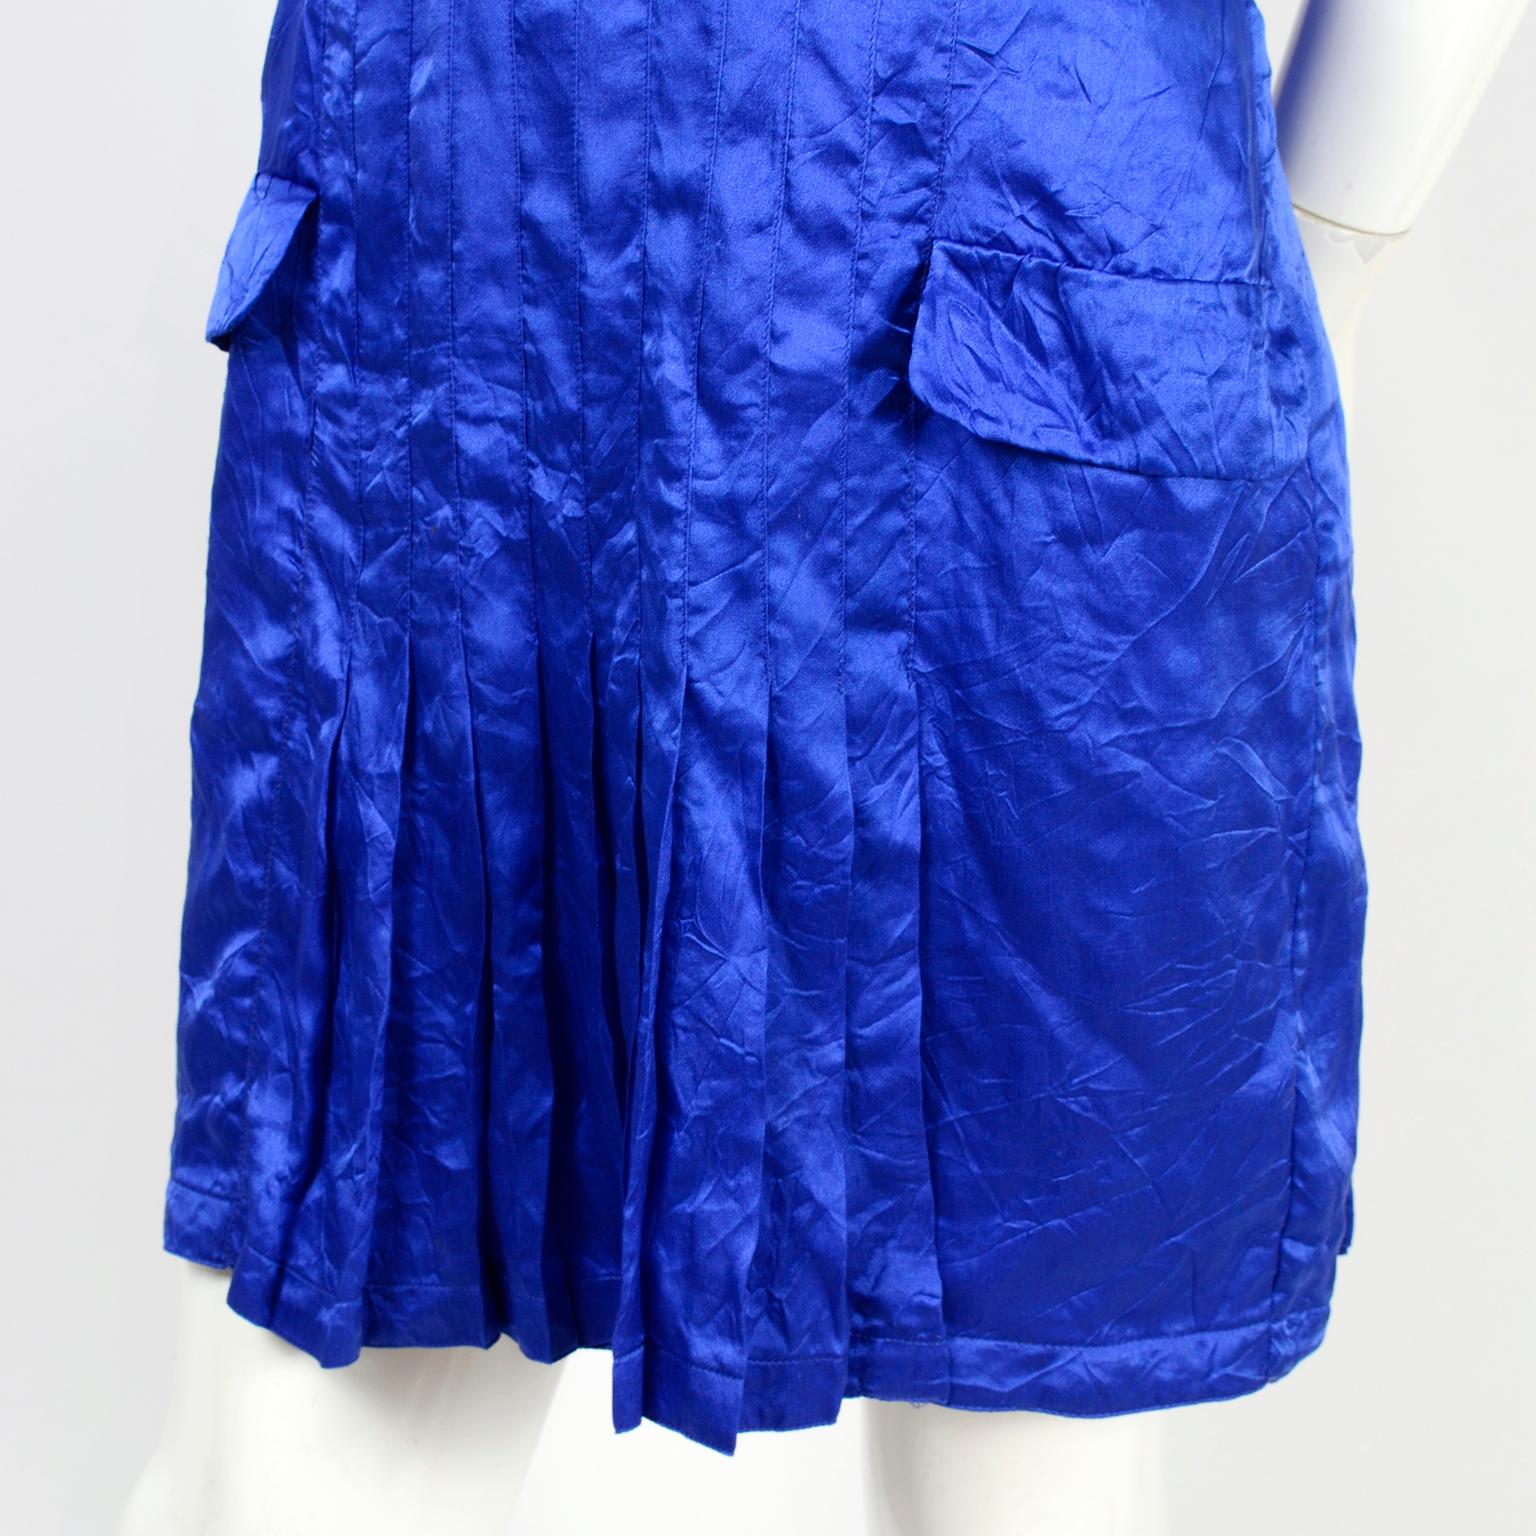 Gianni Versace Couture Blue Silk Documented Runway Dress, 1994  For Sale 2